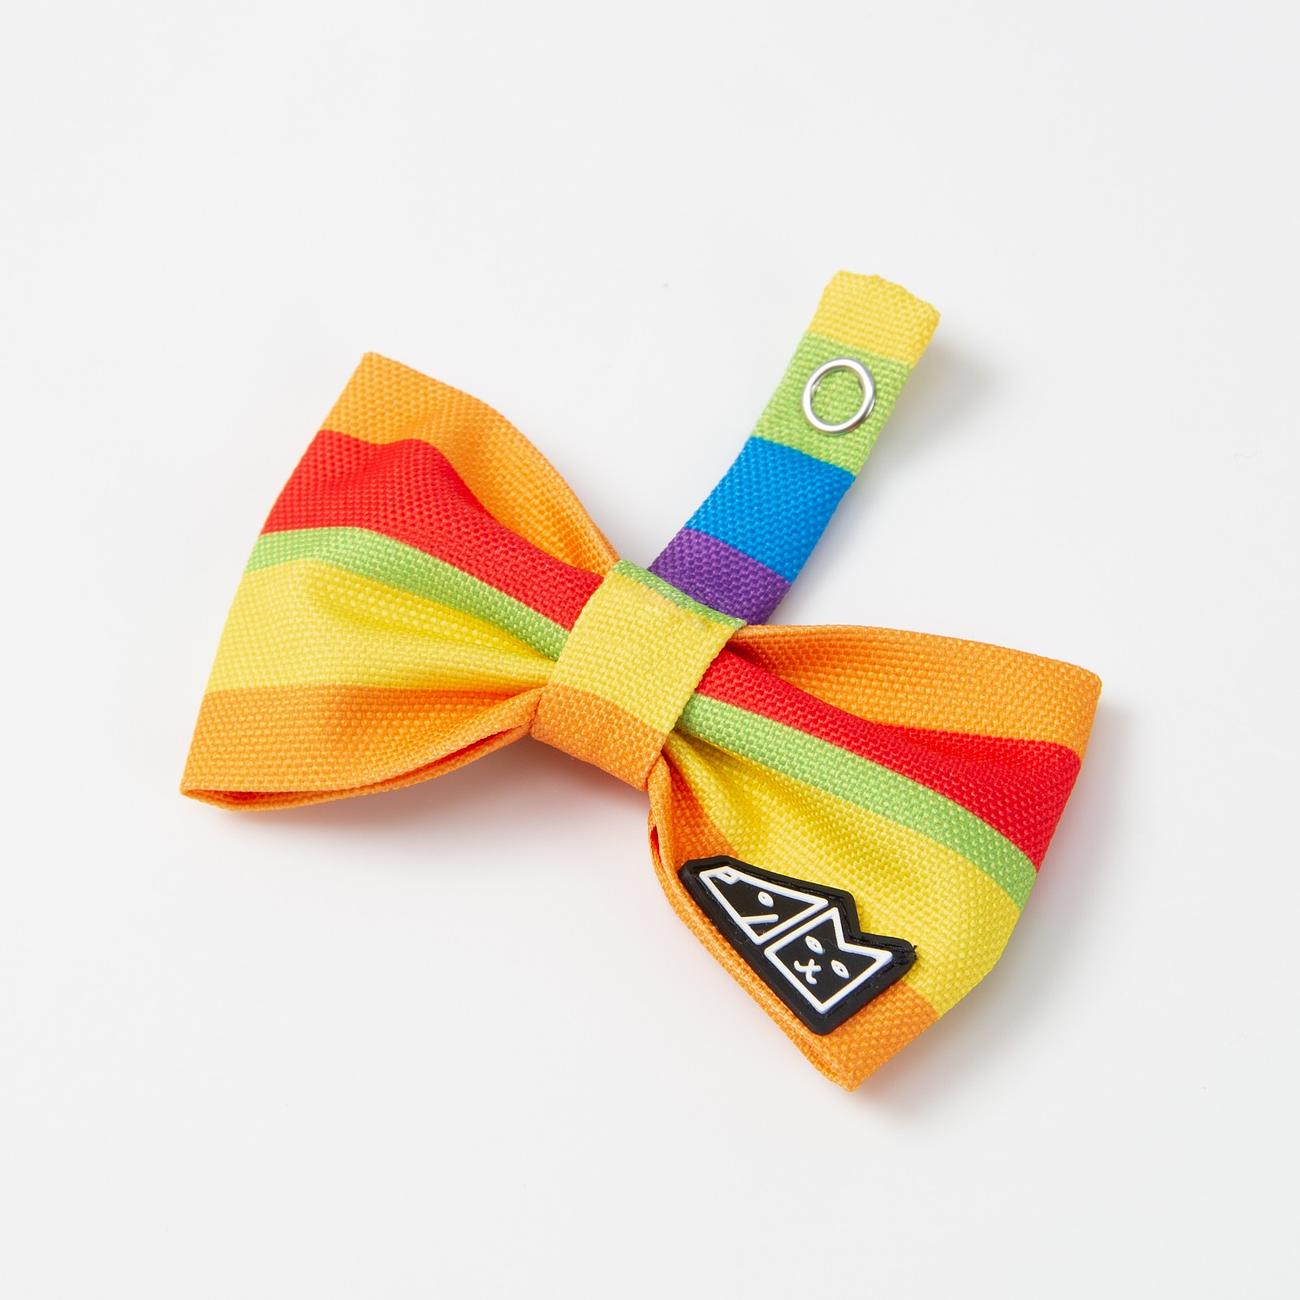 Bow tie "Love, Equality, Teethers" 